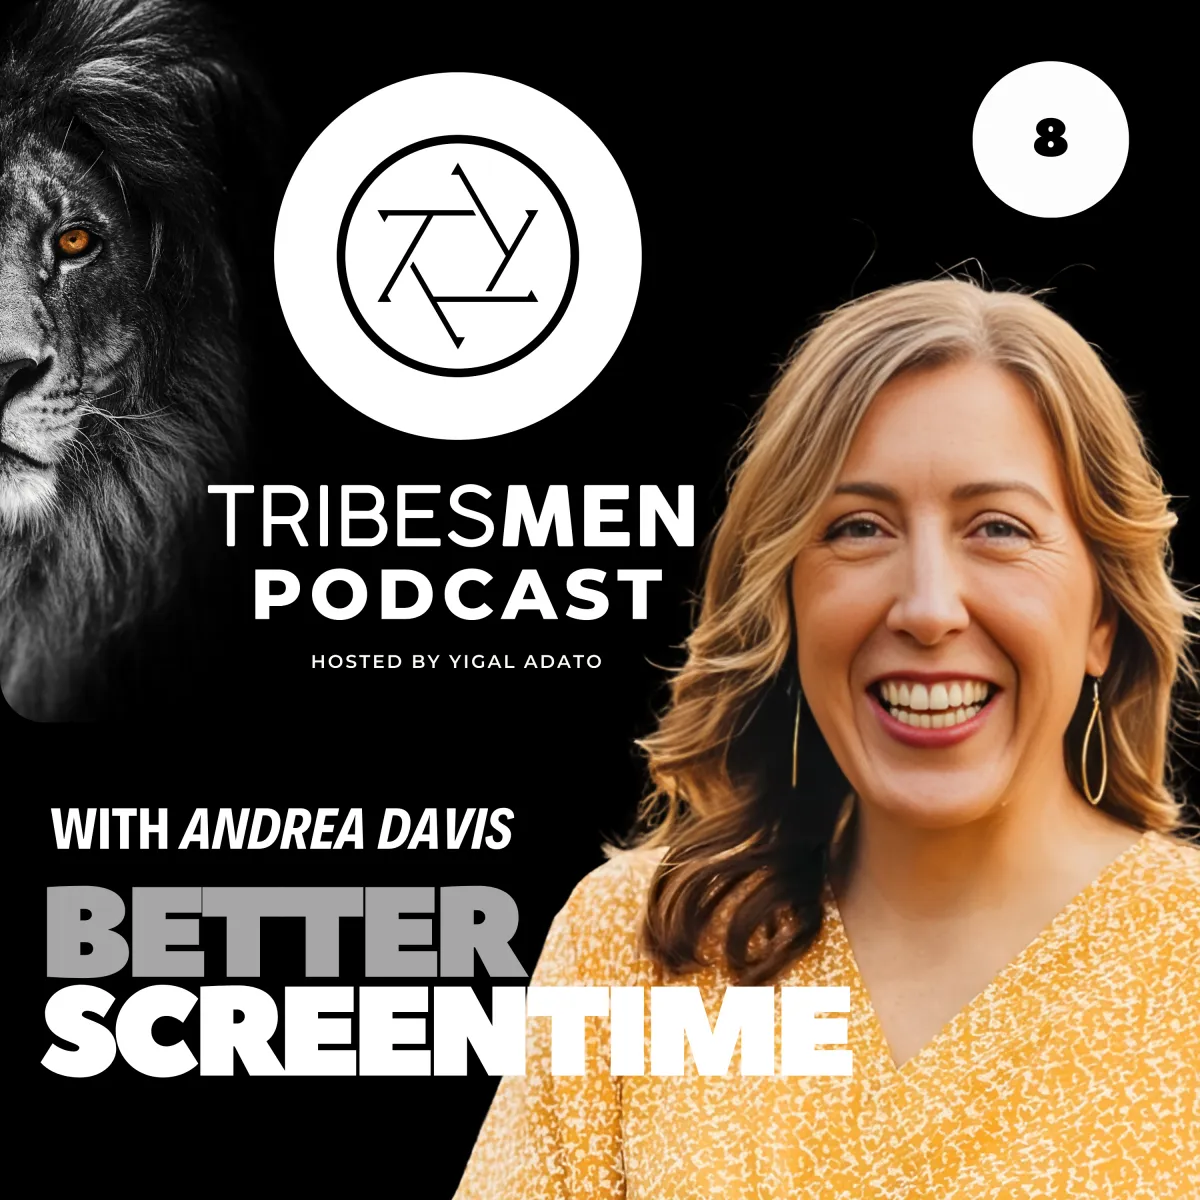 Tribesmen Podcast Episode 8 with Andrea Davis